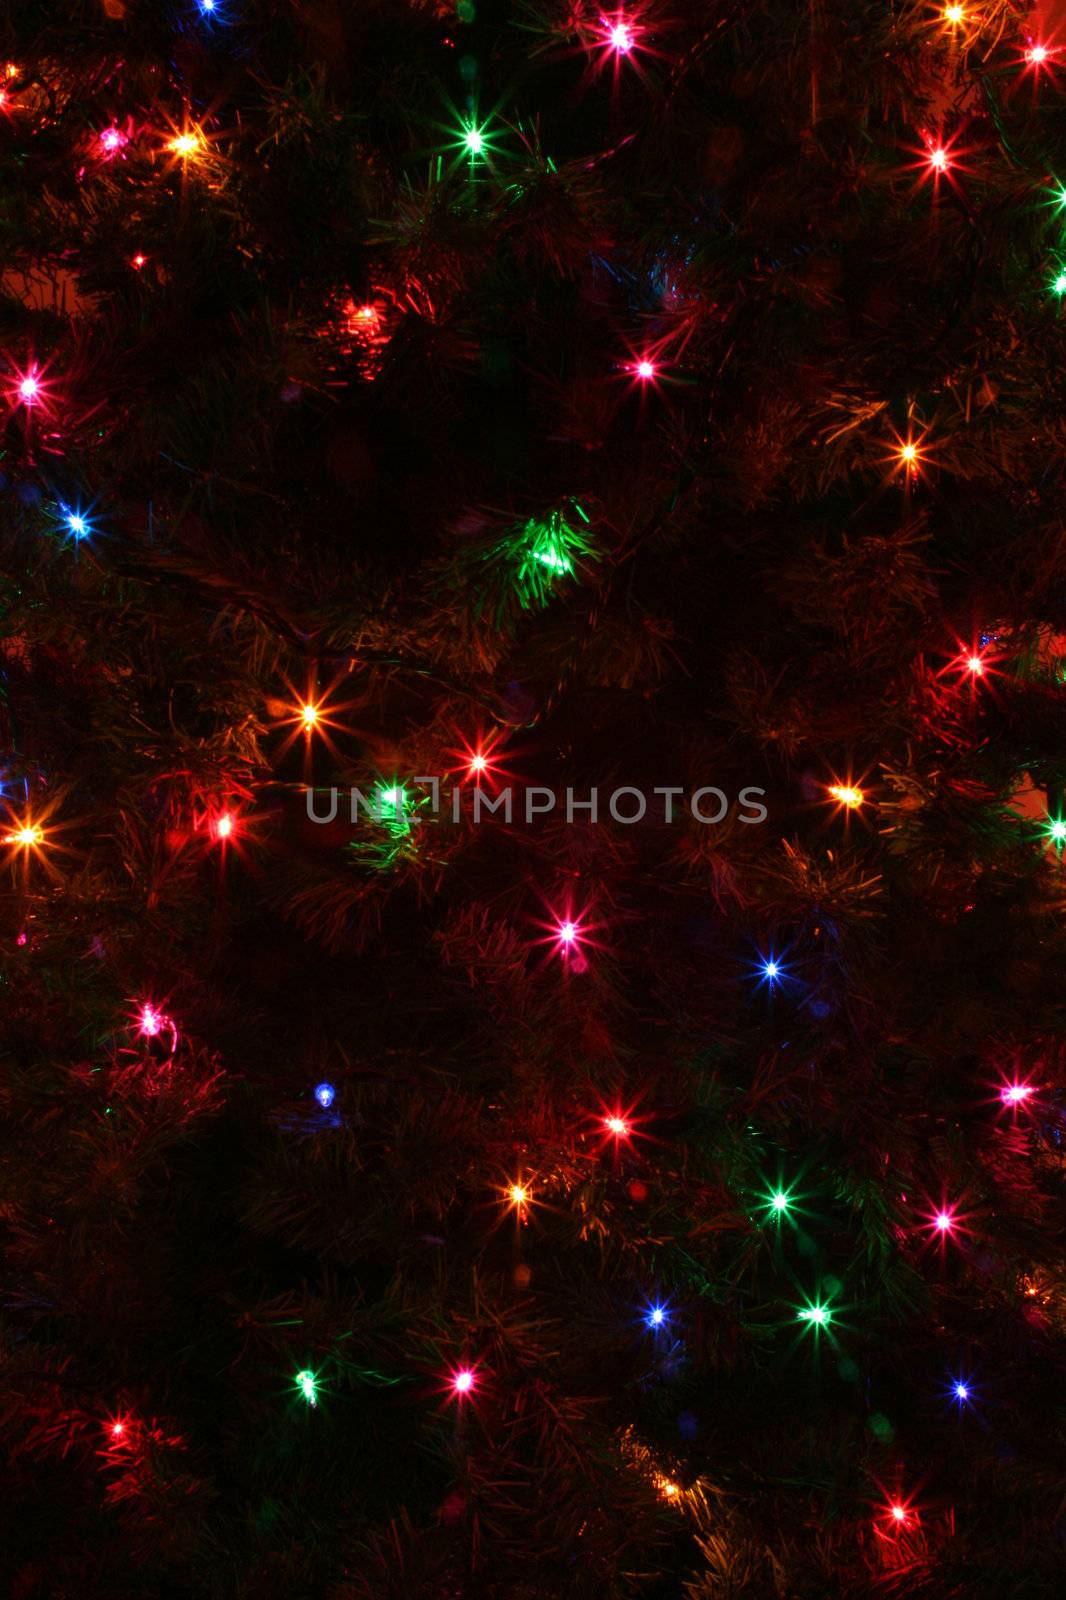 An abstract of some colorful Christmas Tree lights.